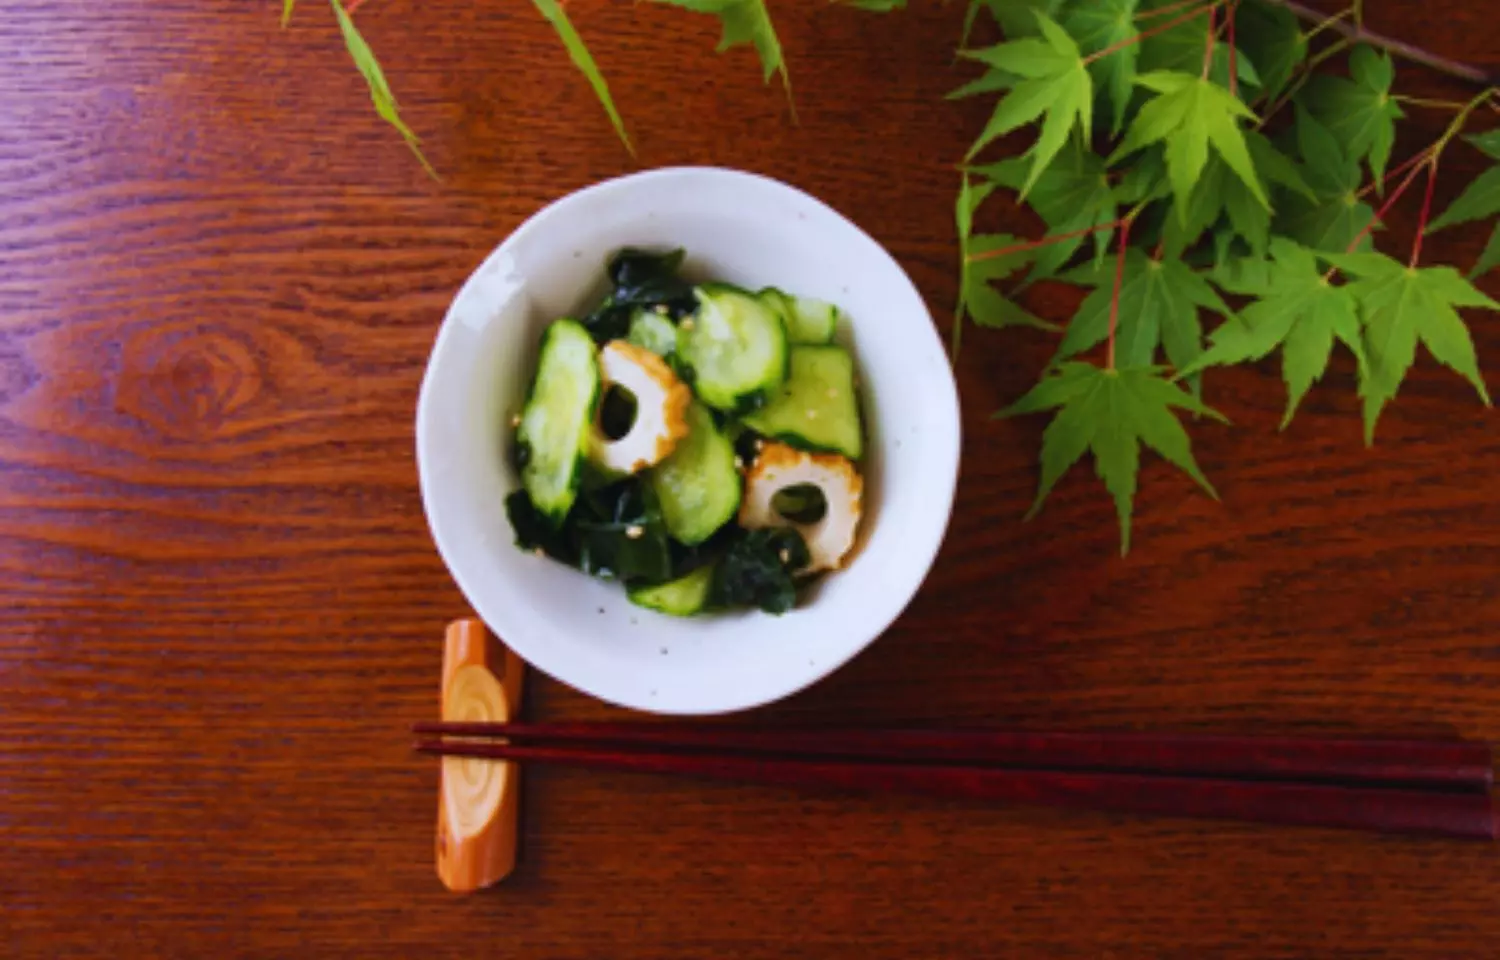 Regular consumption of Japanese vinegared side dish may lower BP in men over 40